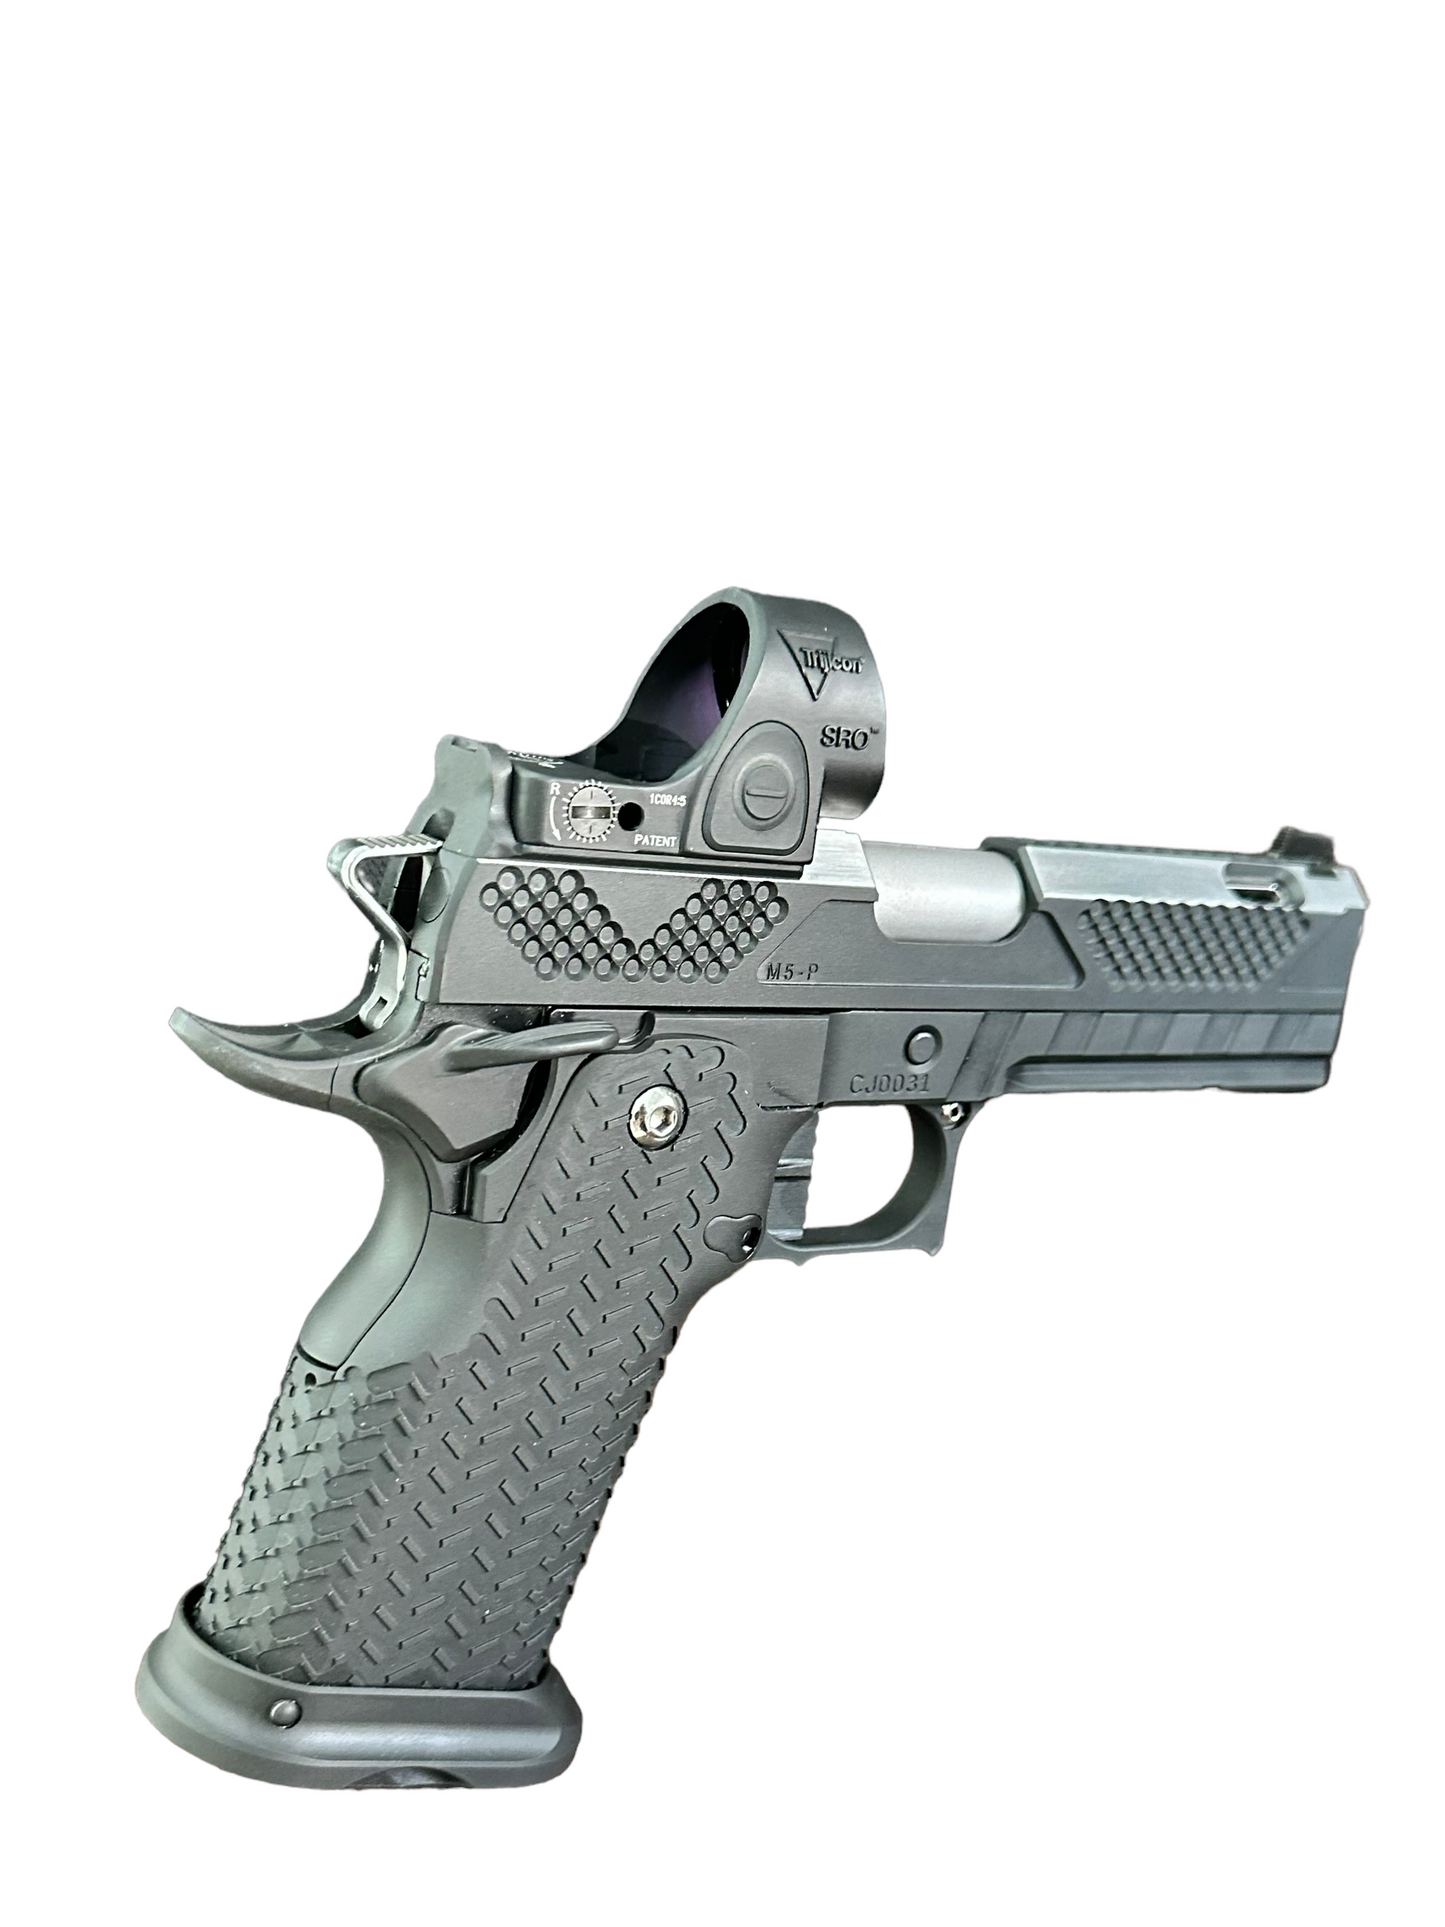 COMBAT PRECISION M5-P 2011 PORTED LIMITED EDITION WITH HIGH POLISHED RACE STRIPES TRIJICON SRO